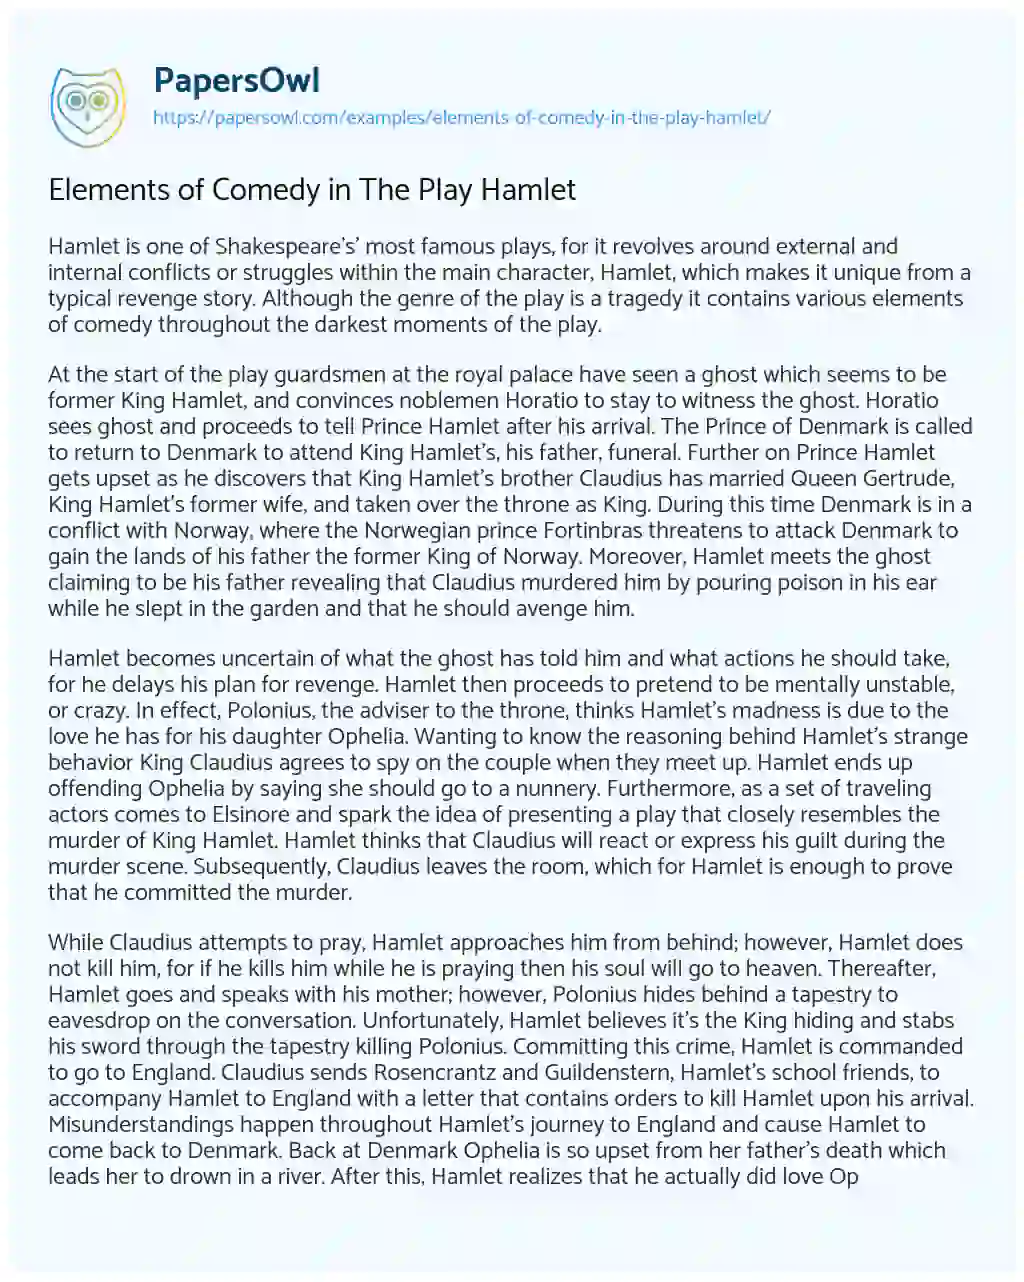 Essay on Elements of Comedy in the Play Hamlet